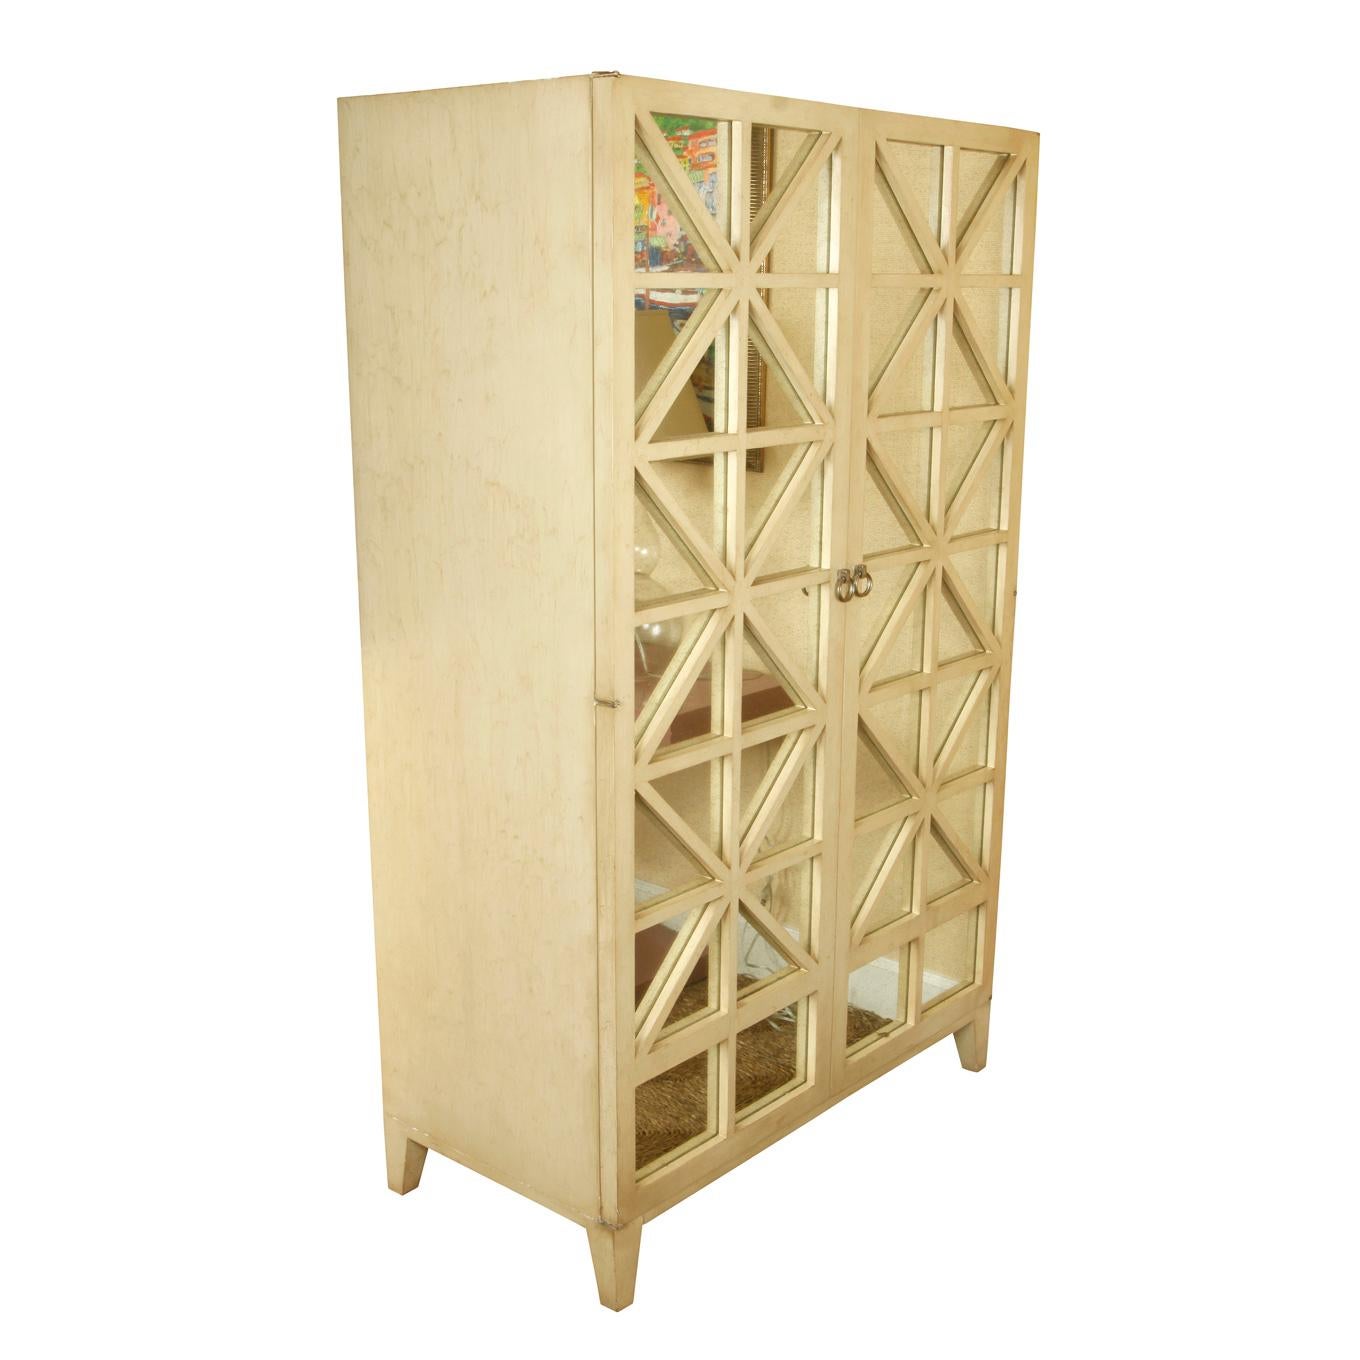 Hickory Chair cabinet with ivory painted wood and mirrored front, perfect as a bar or entertainment unit. Ivory wood and mirror create beautiful bias lattice design to front of cabinet.